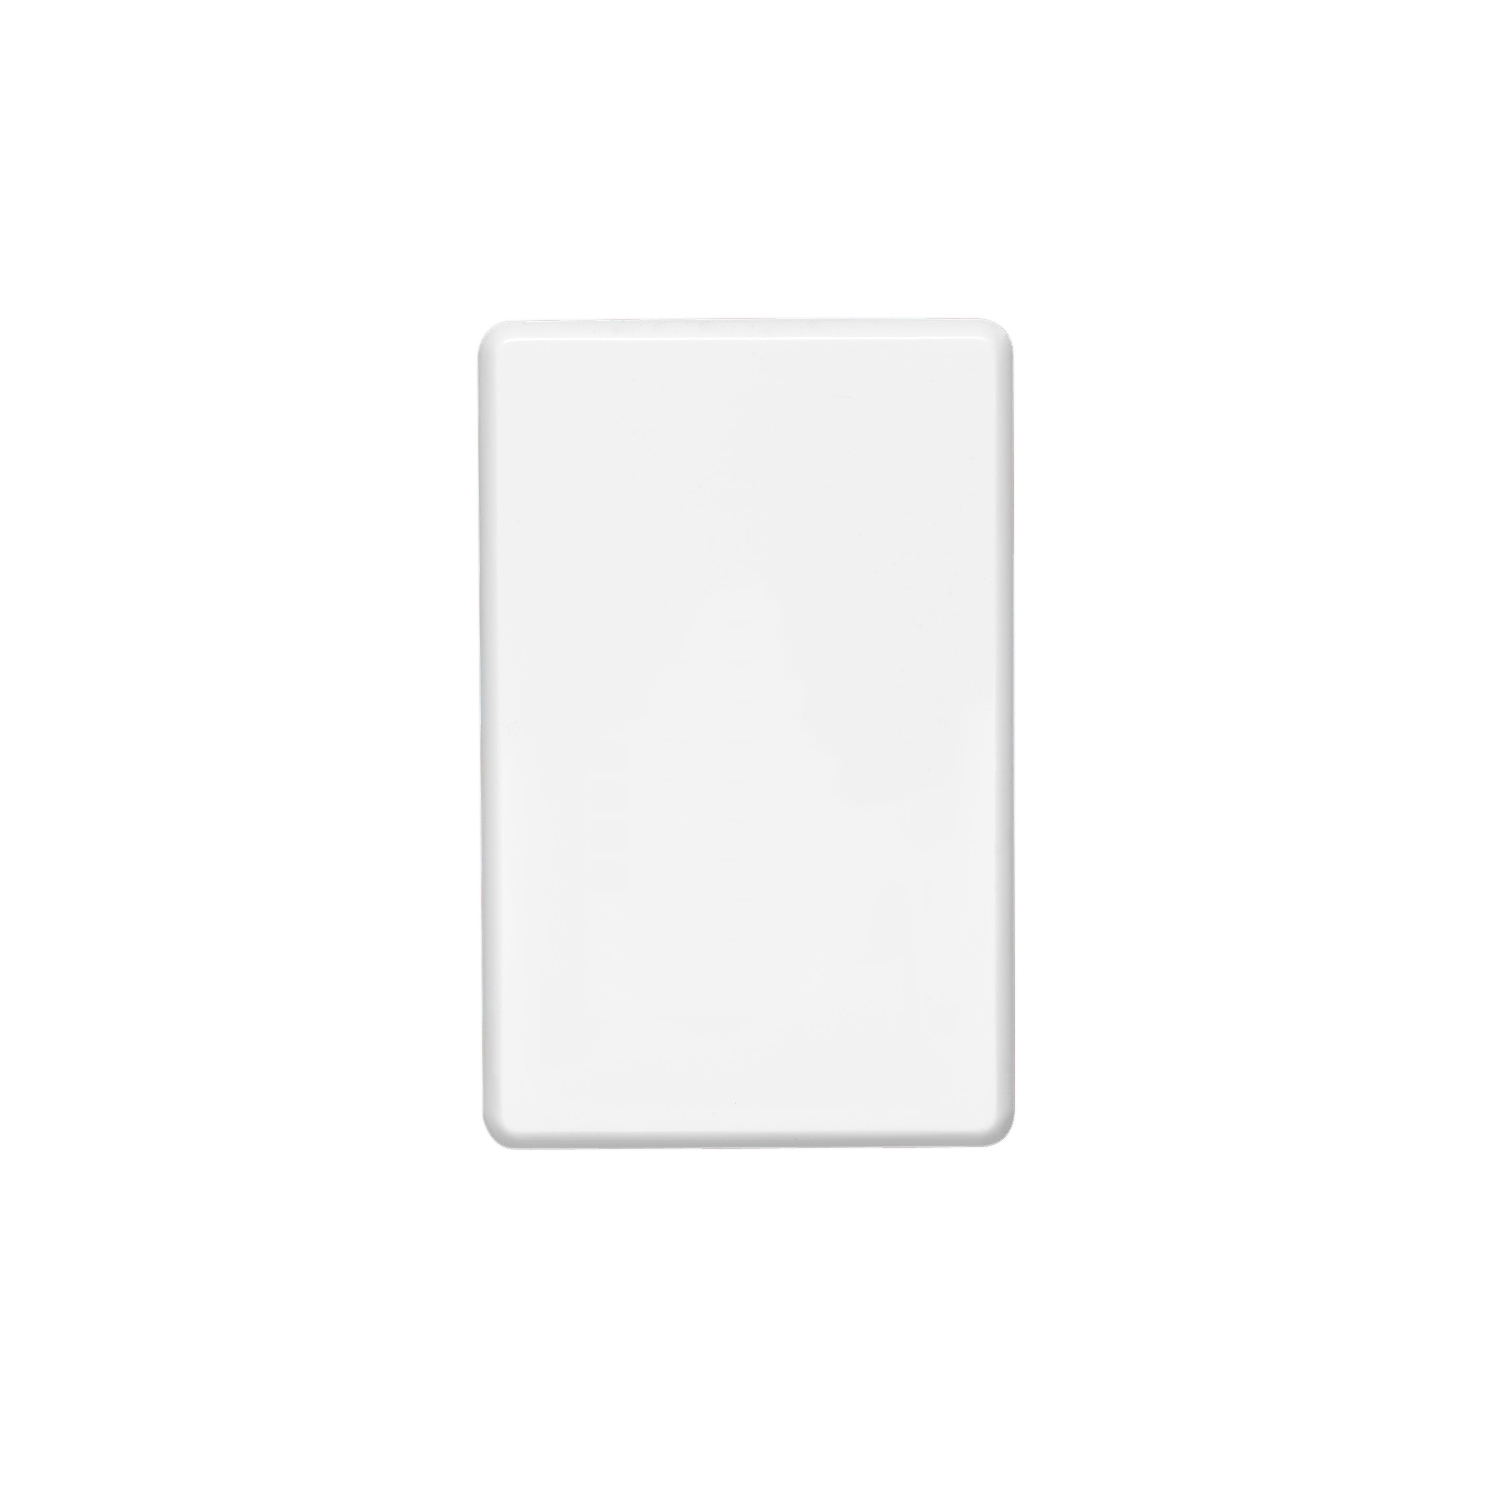 Switch Grid Plates and Covers - C2000 Series - Blank